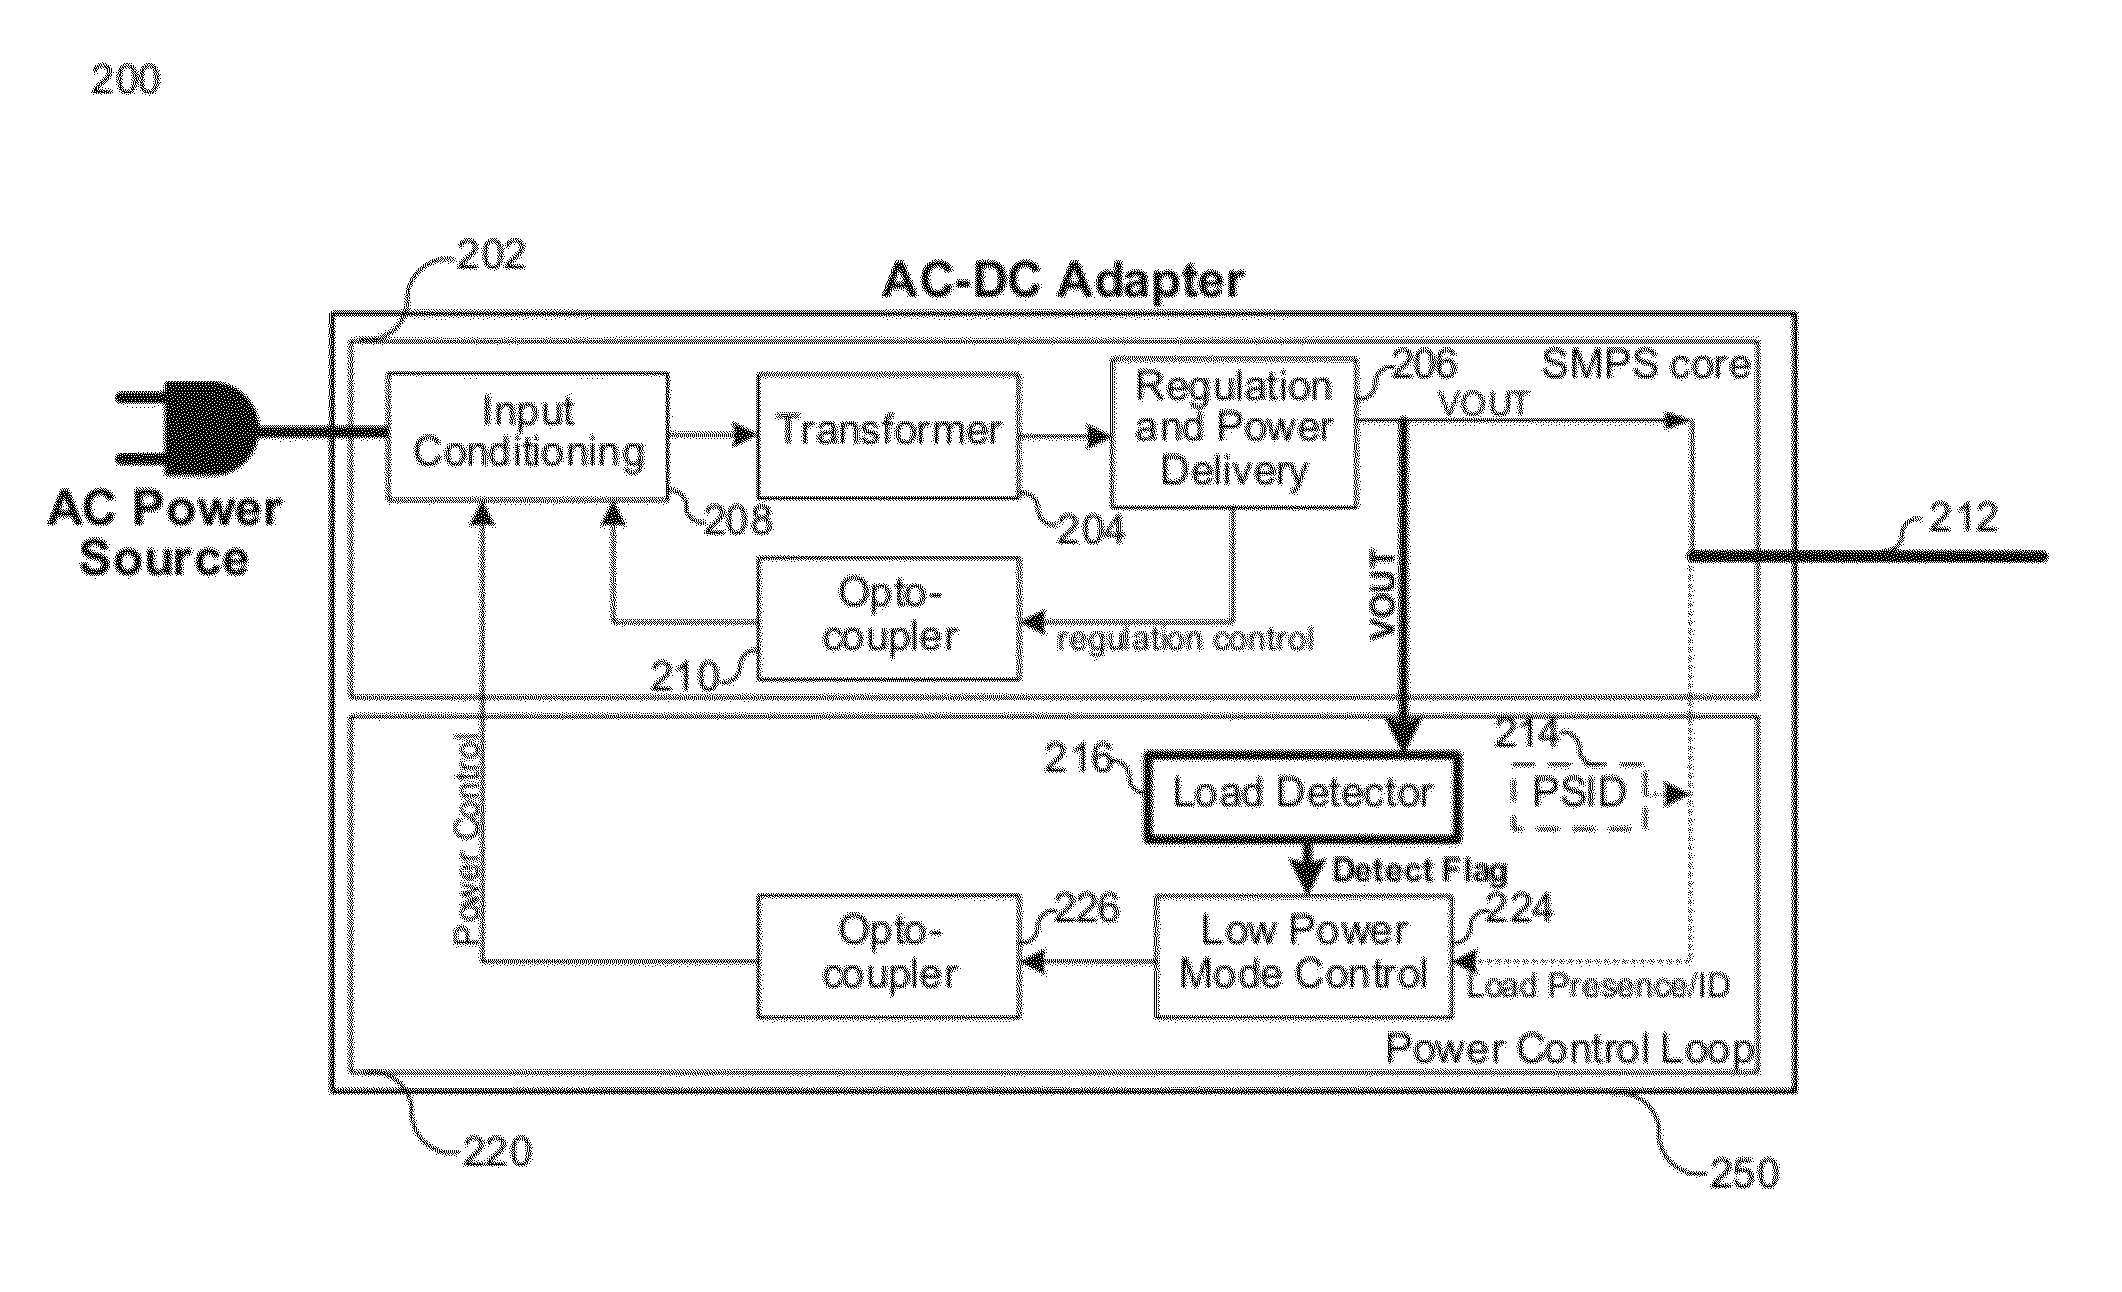 Load Detection for a Low Power Mode in an AC-DC Adapter